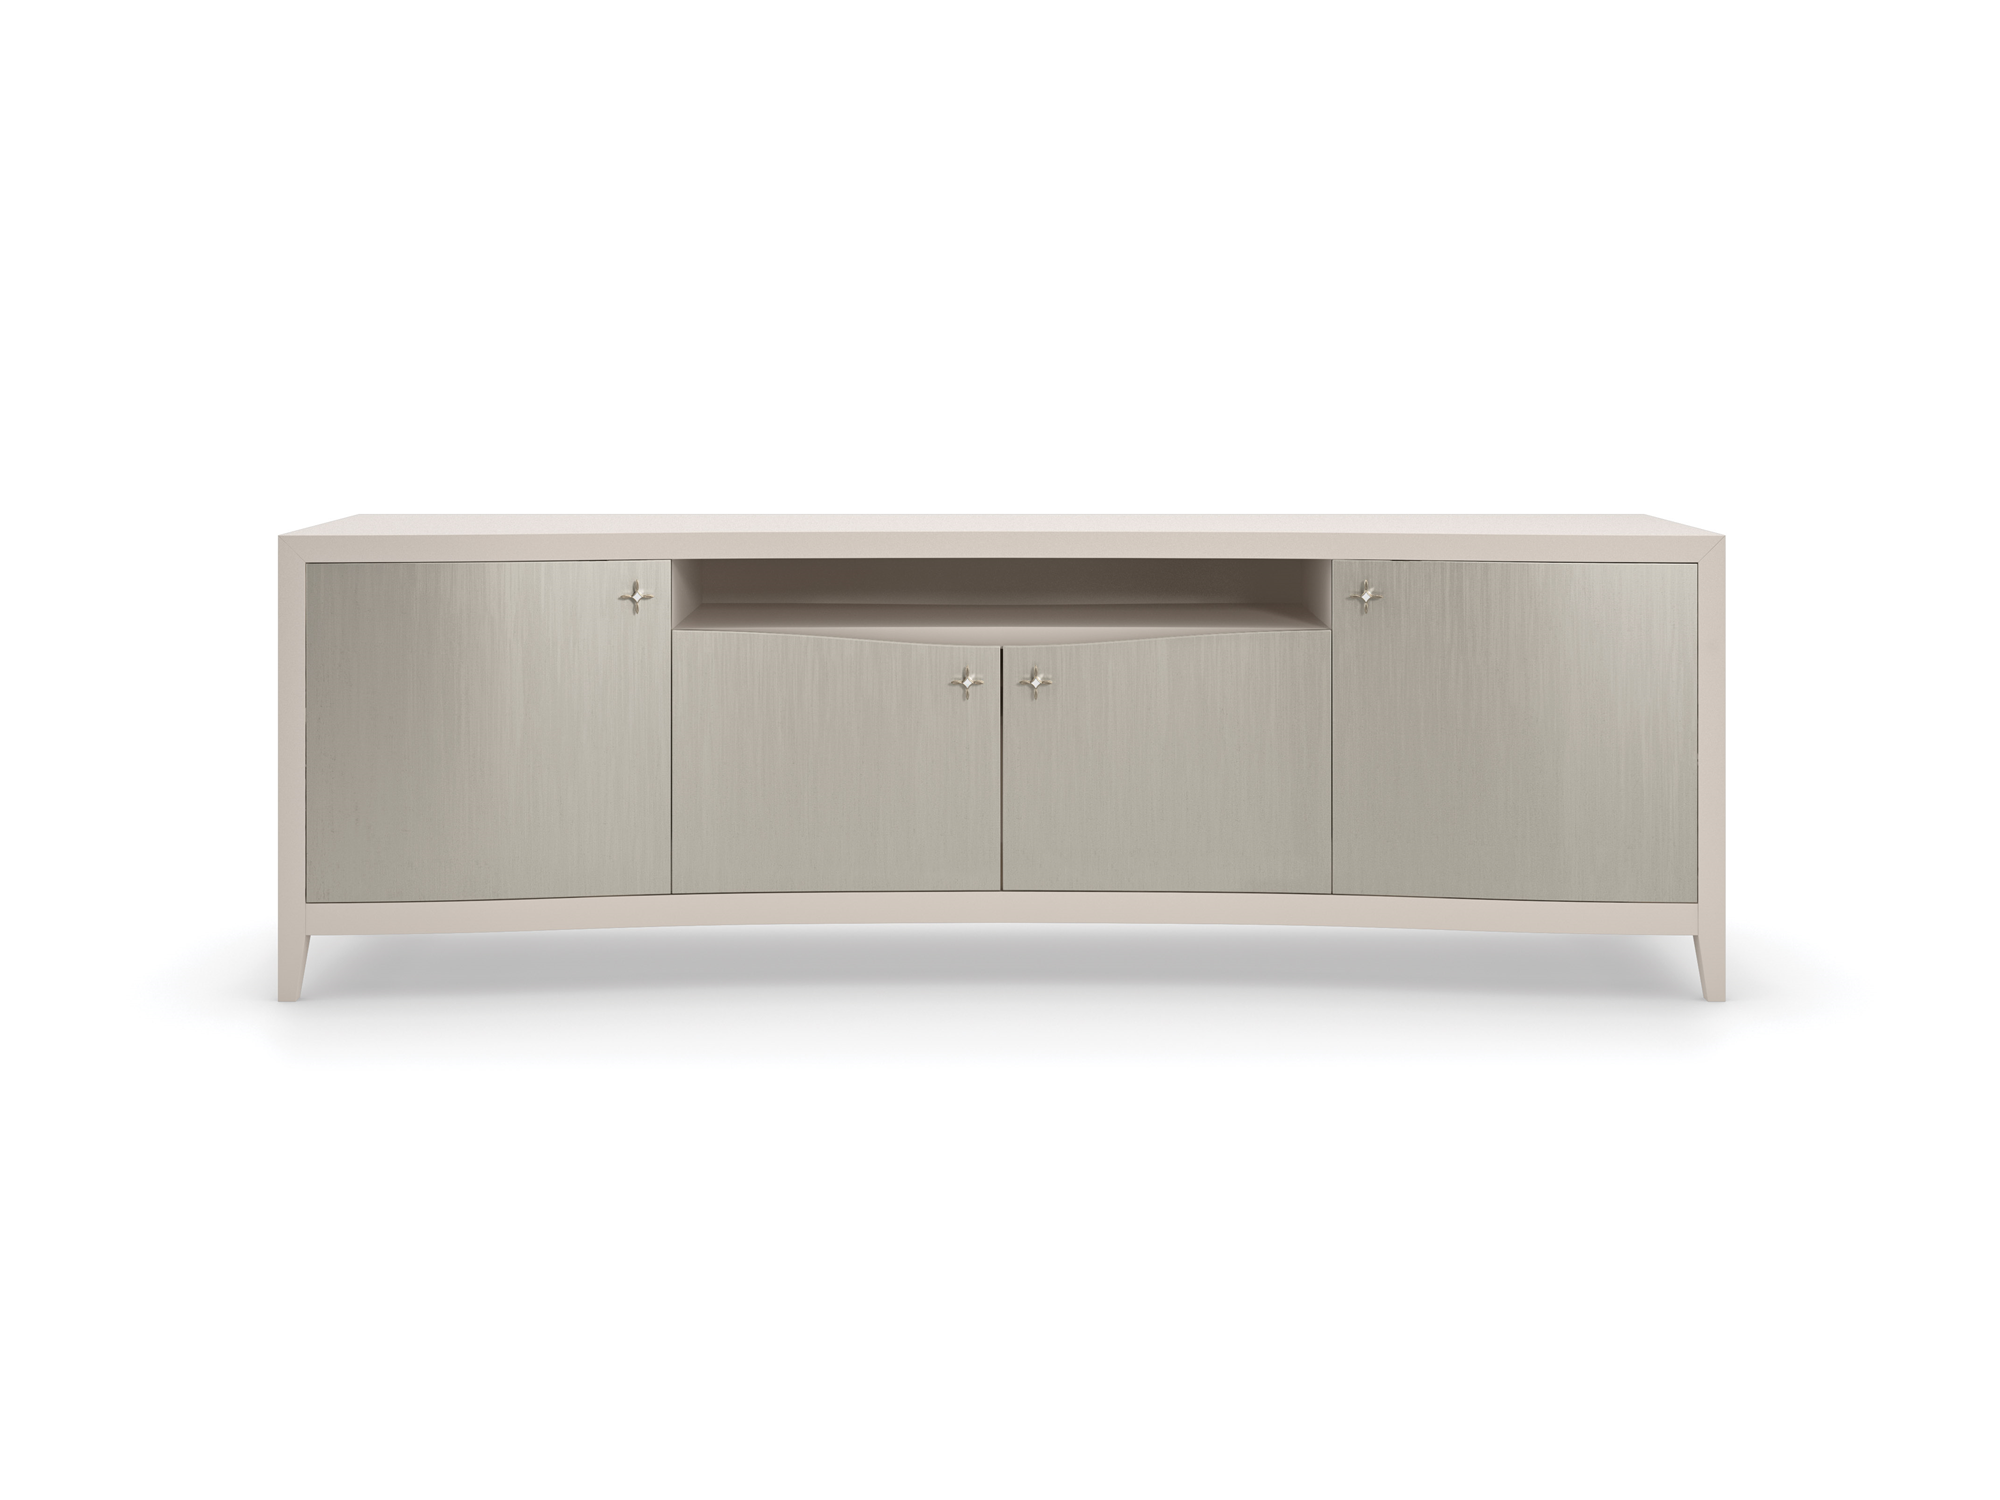 Babs Full of Charm Cabinet - Euro Living Furniture